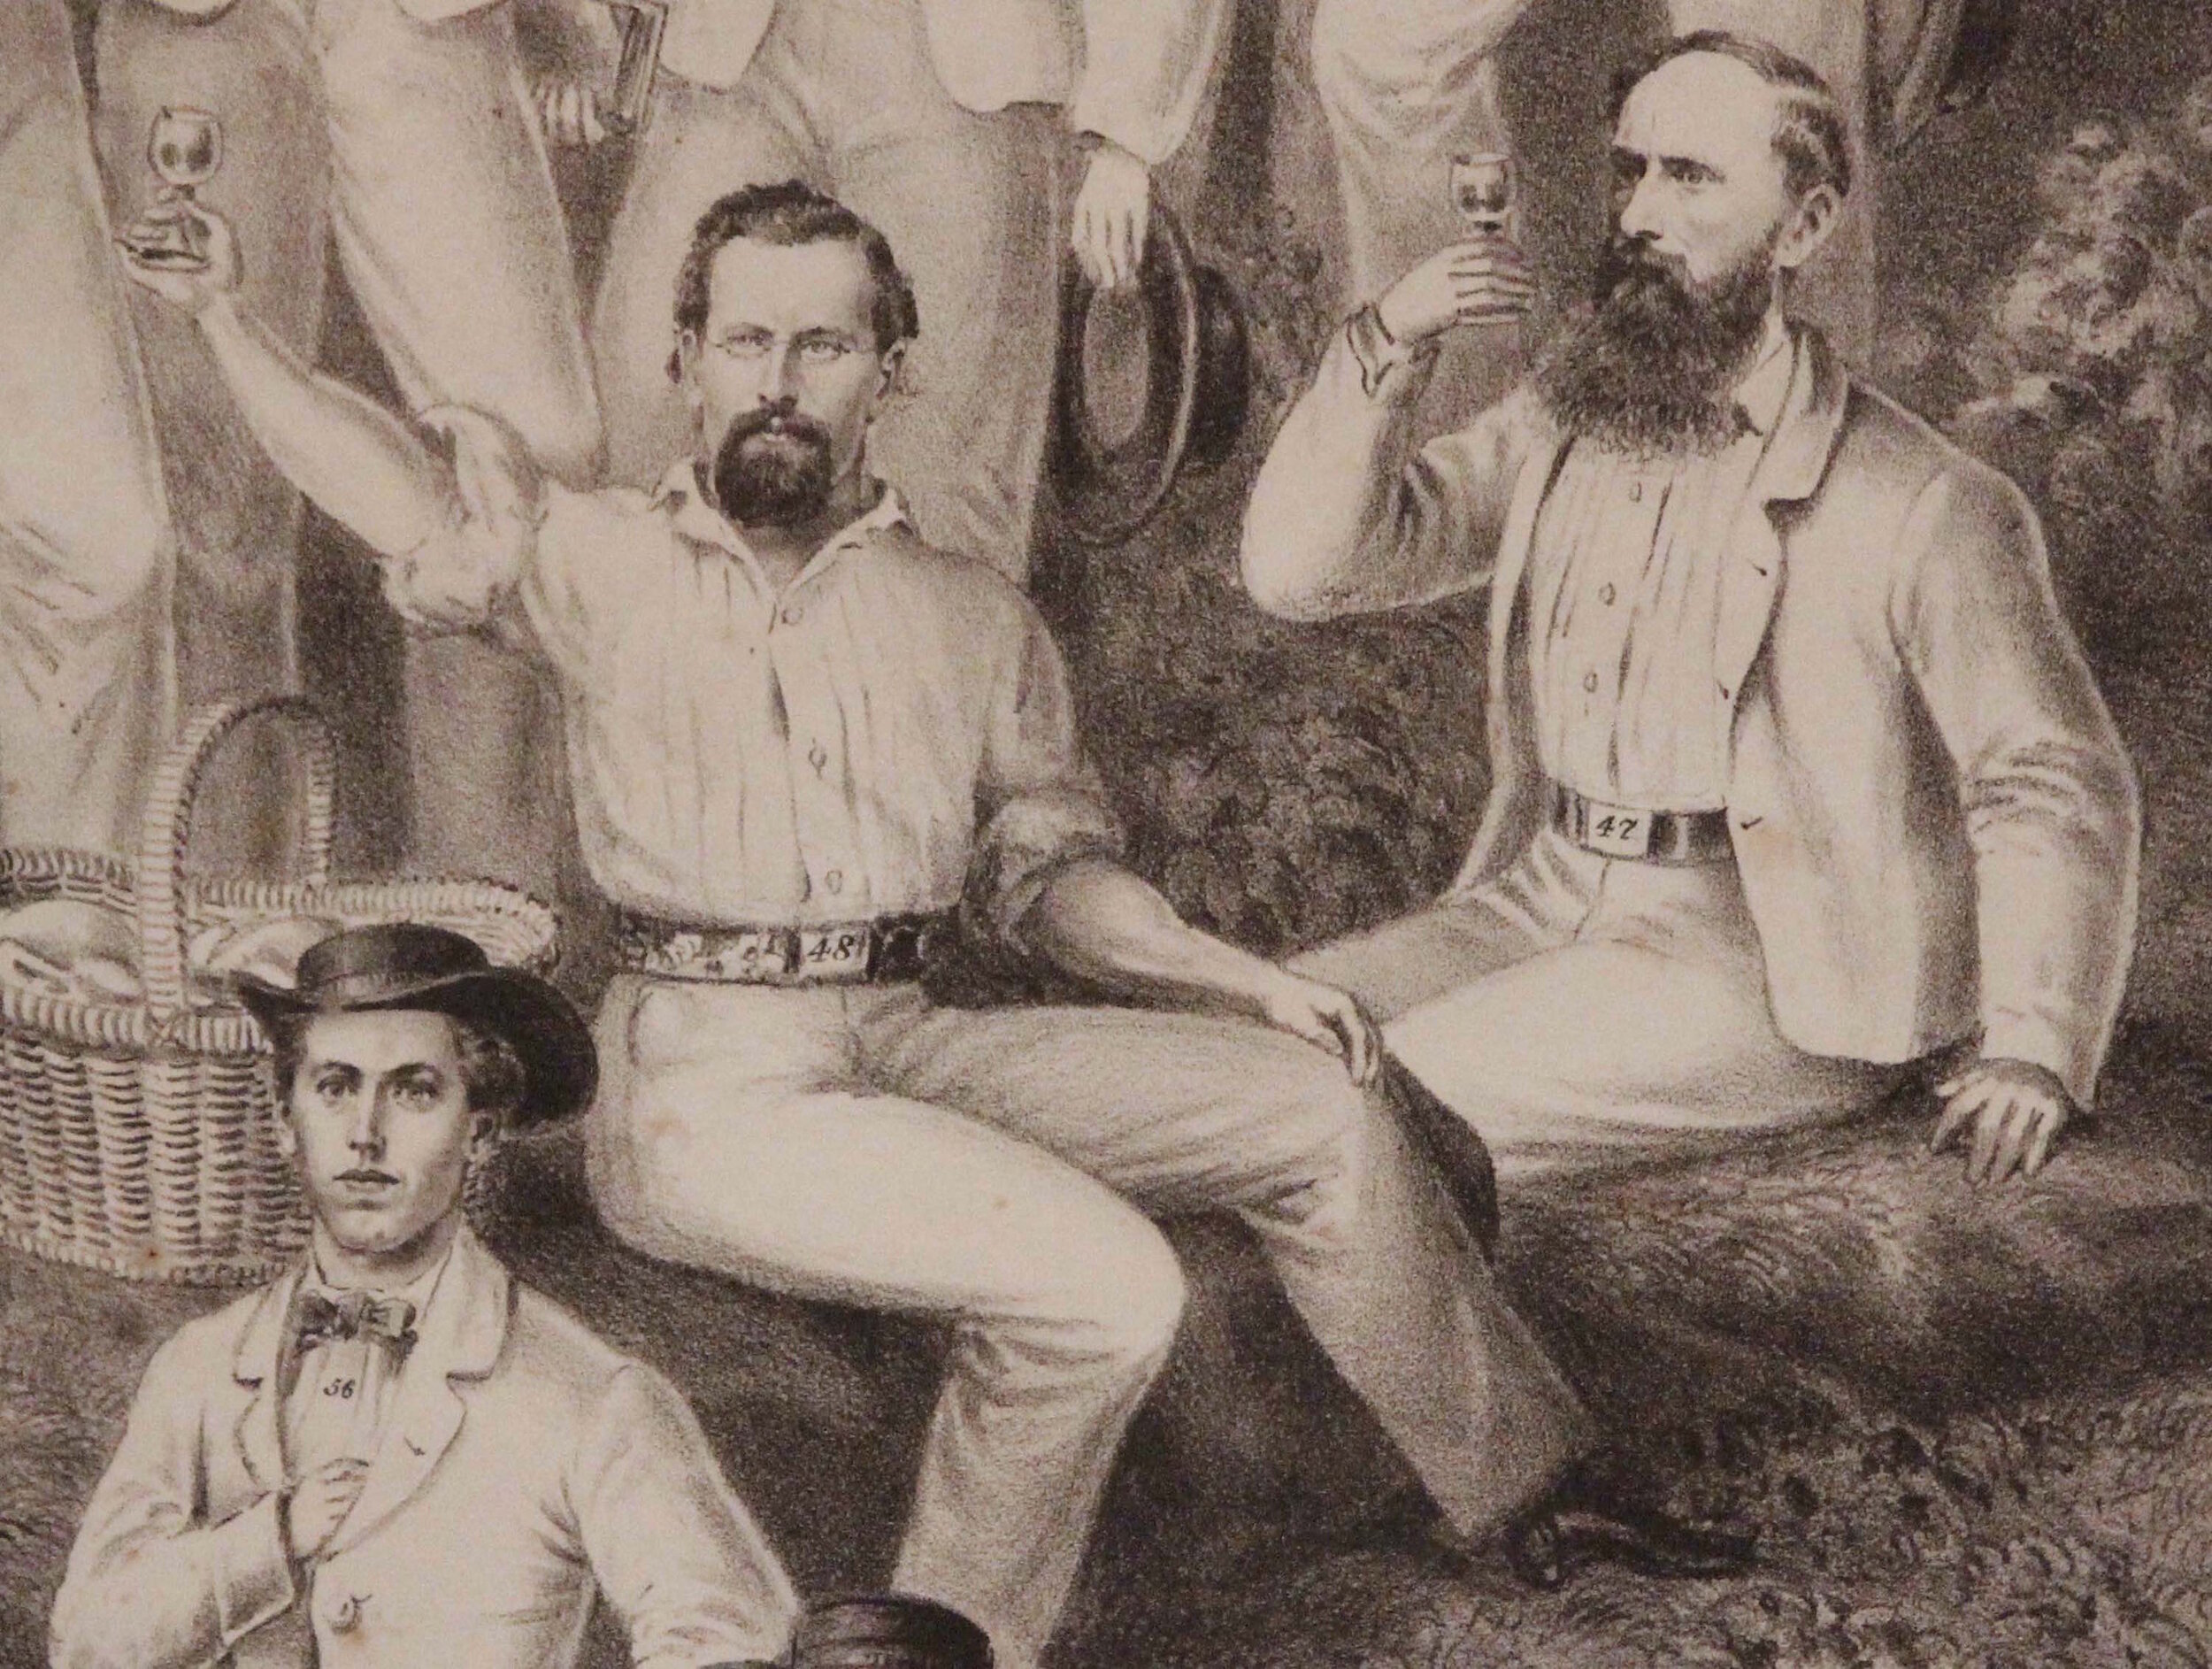  John George Ott (left) raises a glass of wine in an 1863 lithograph depicting 62 members of the Madison Turnverein. Fellow Turner Frederick Sauthoff (right) and his wife Johanna lived very near the Otts on Jenifer Street. (Image: Private collection)